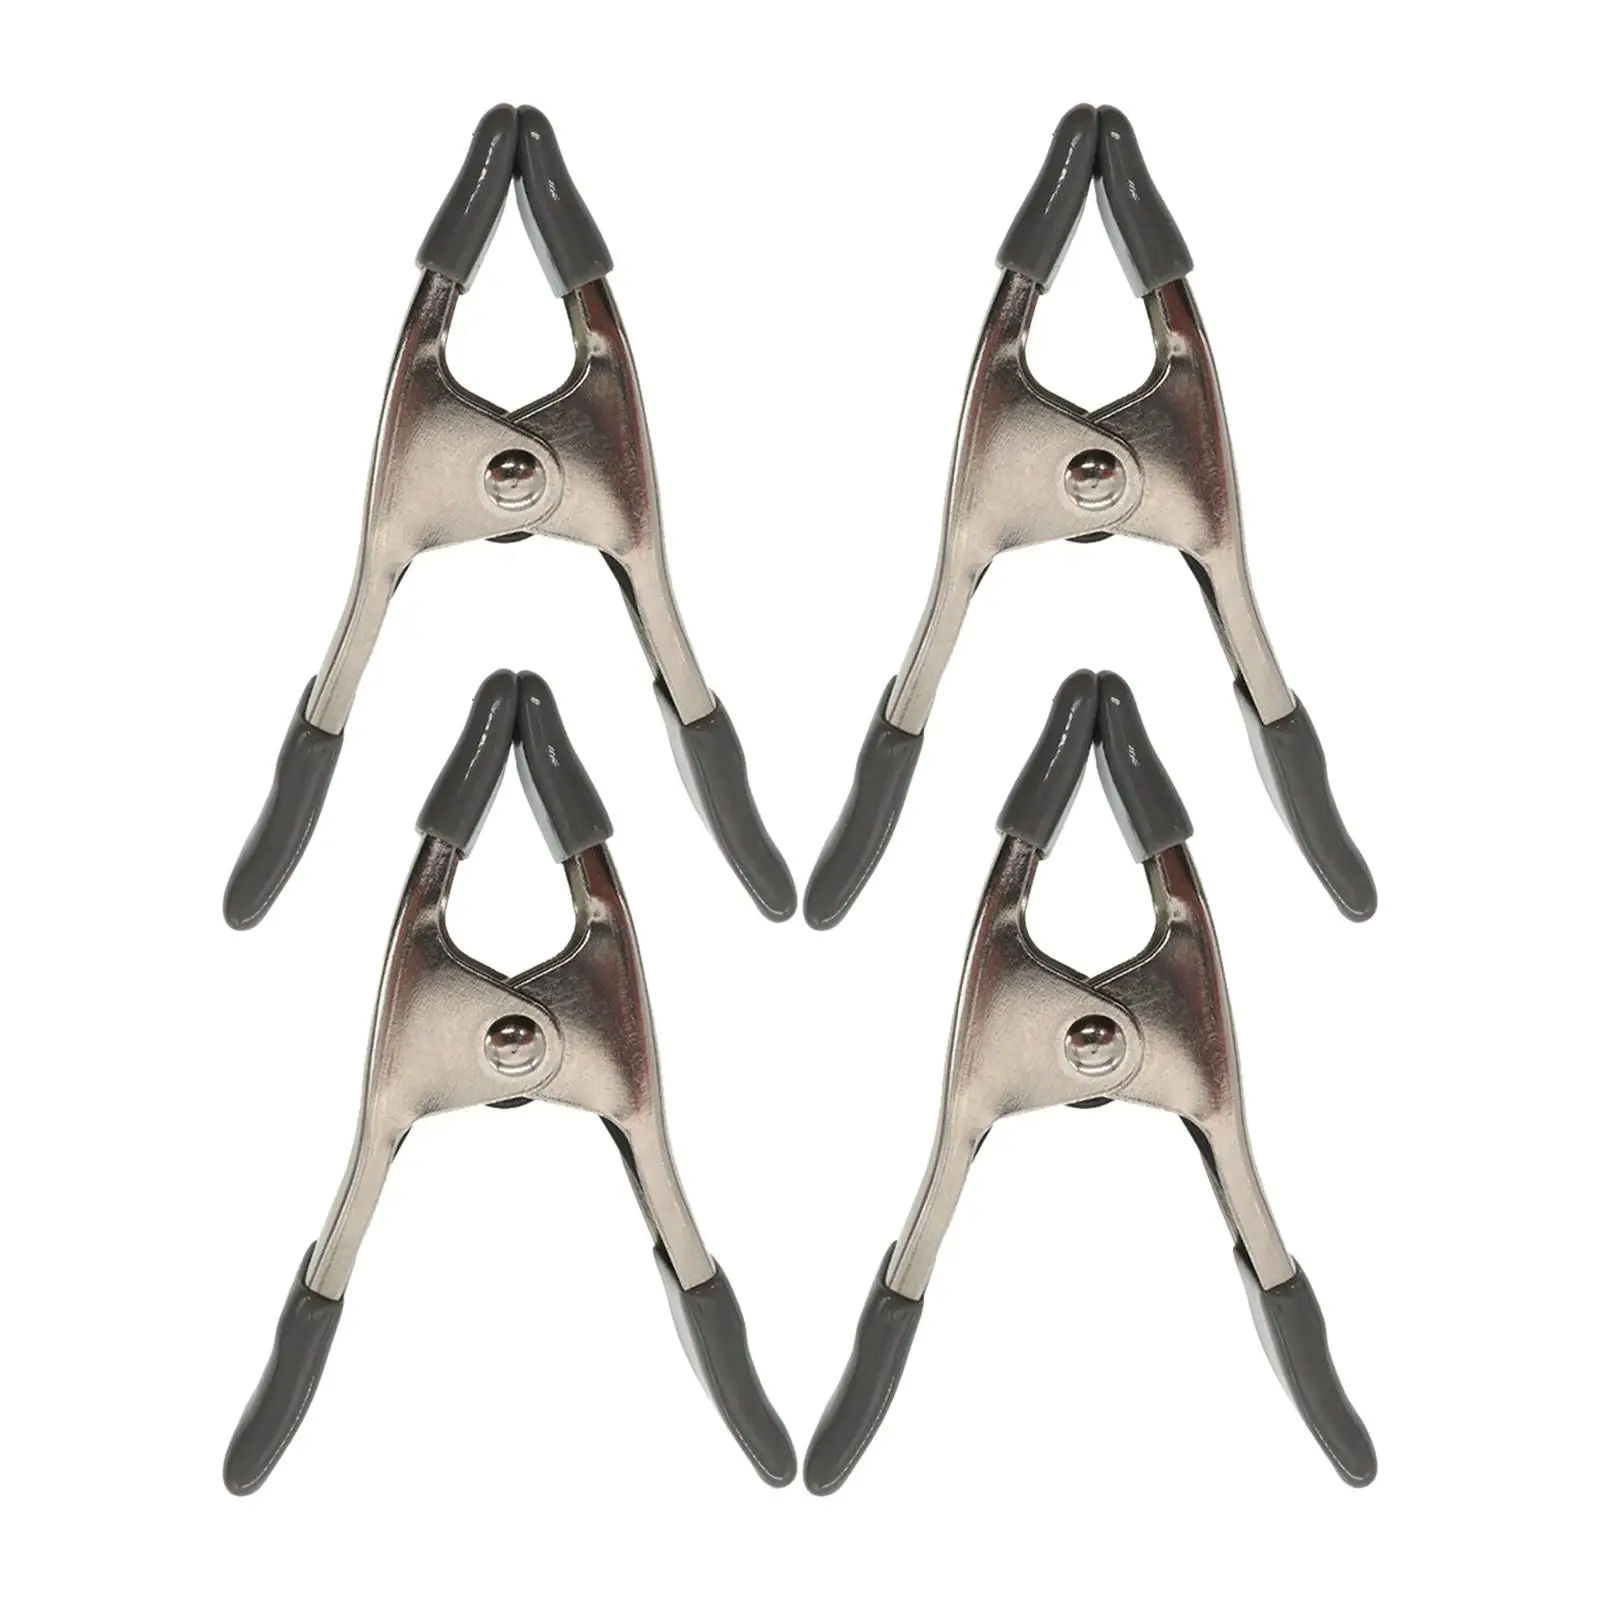 4 Pieces Spring Clamps Devices Durable Backdrop Clips for Woodworking DIY